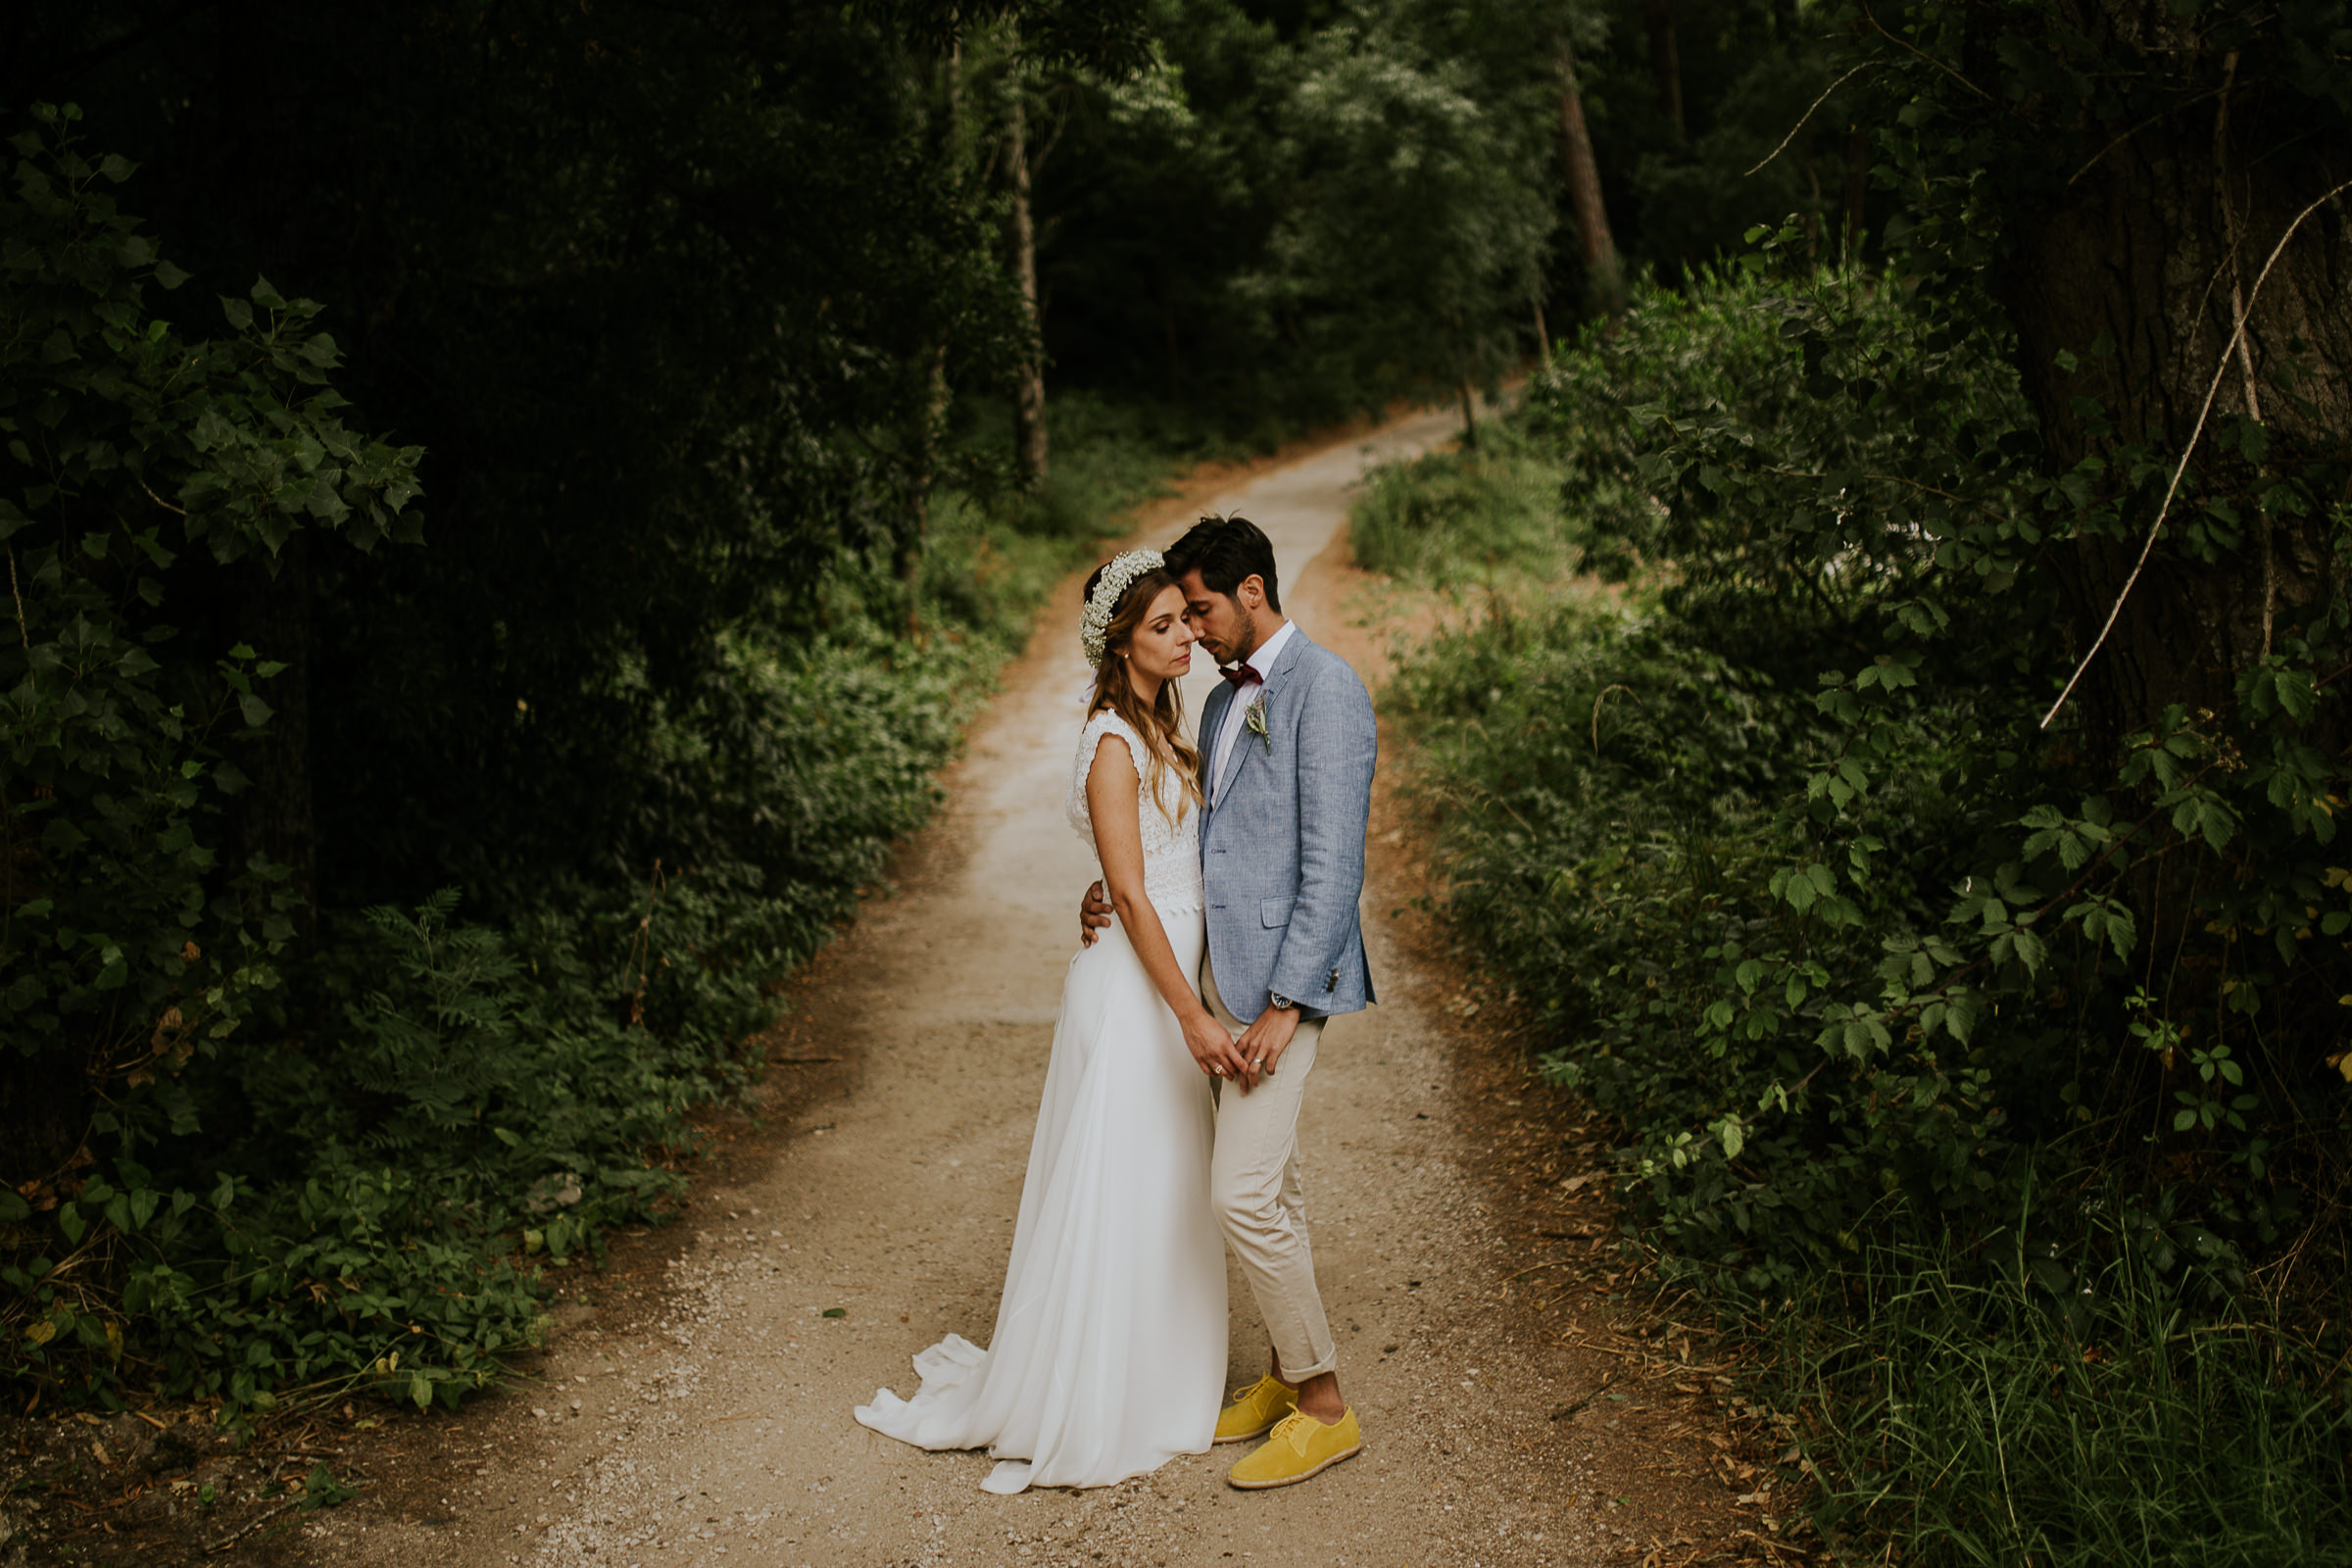 Centered posed portrait of bride and groom on a path in the middle of woods